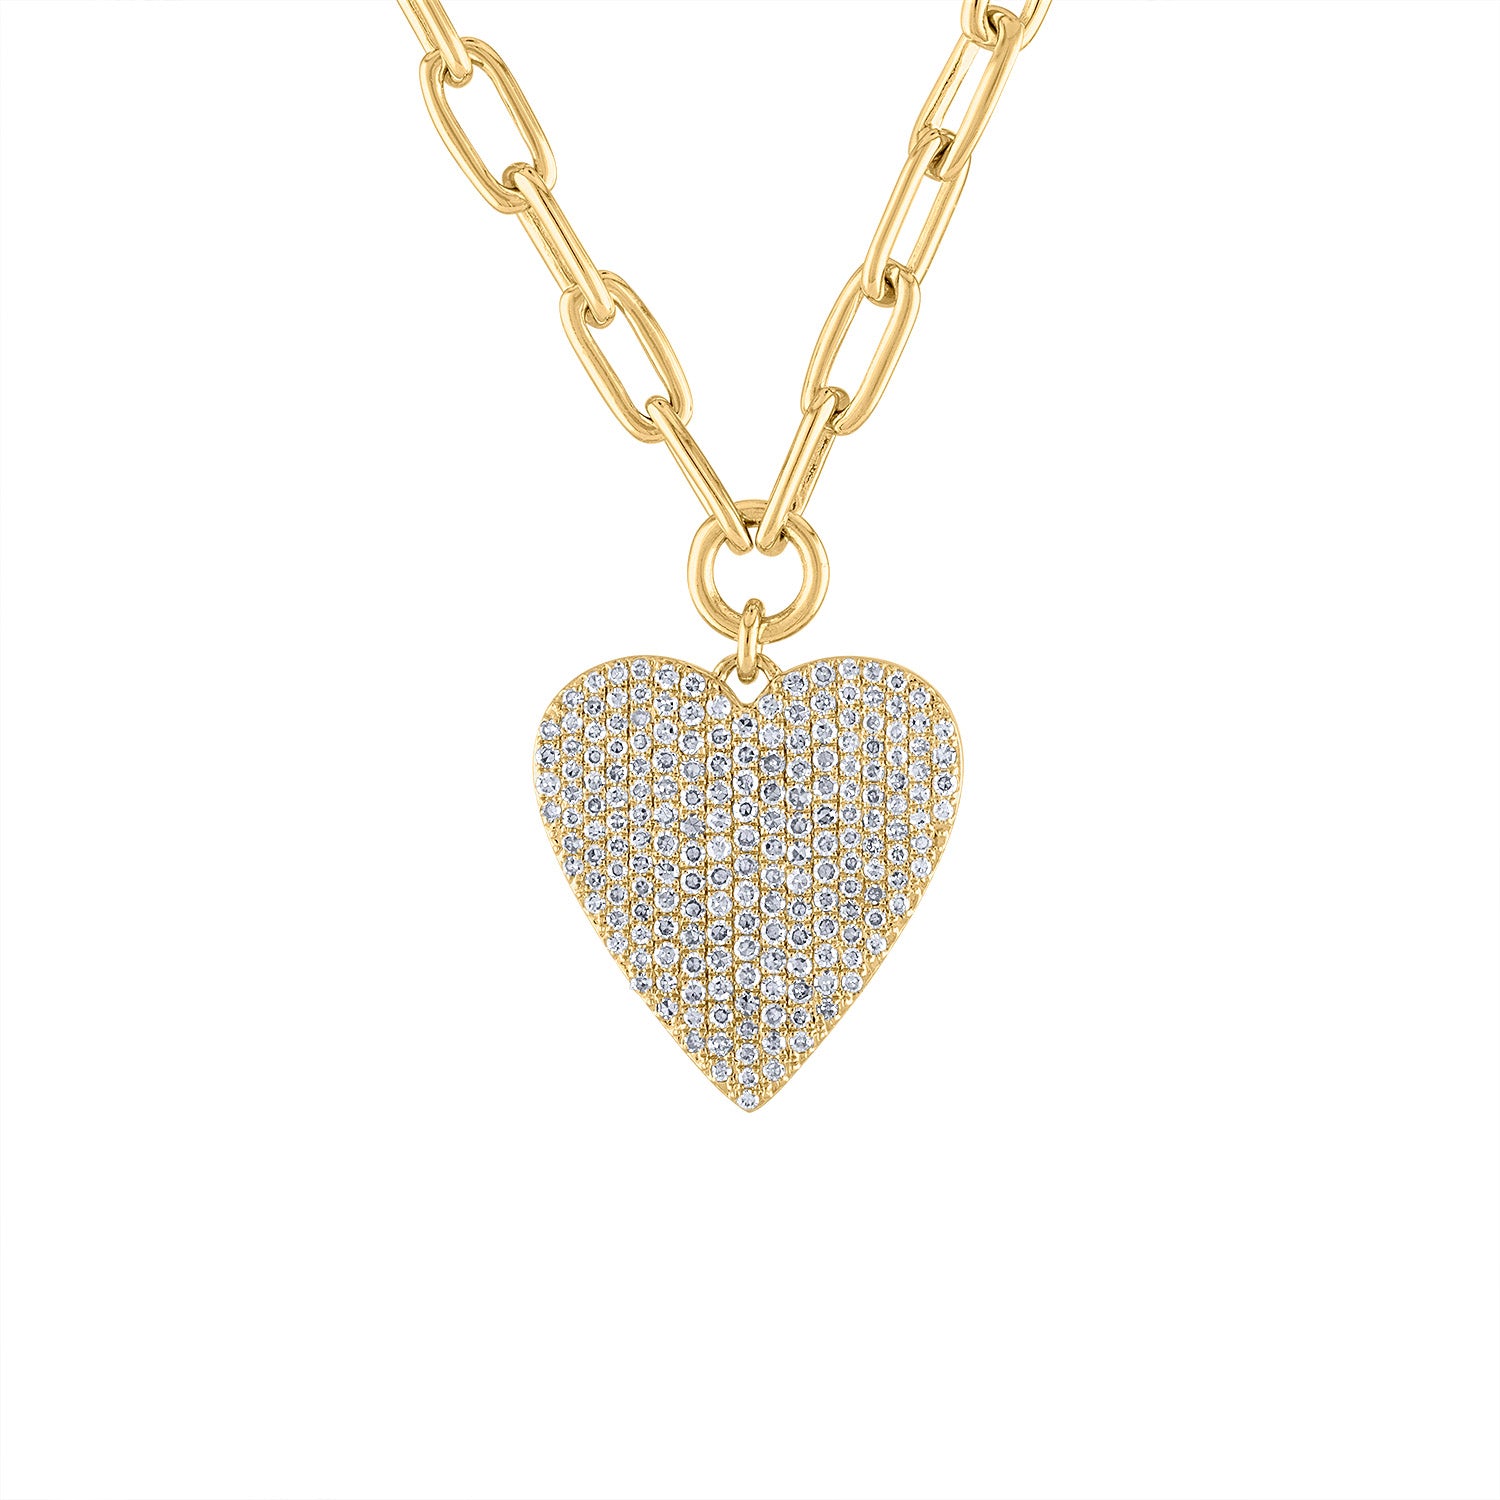 Wholesale Gold plated Sterling Silver Heart Shaped Chain, Wholesale Bulk Necklace  Chains|Jewelry Making Chains Supplies Wholesaler | AZ Findings